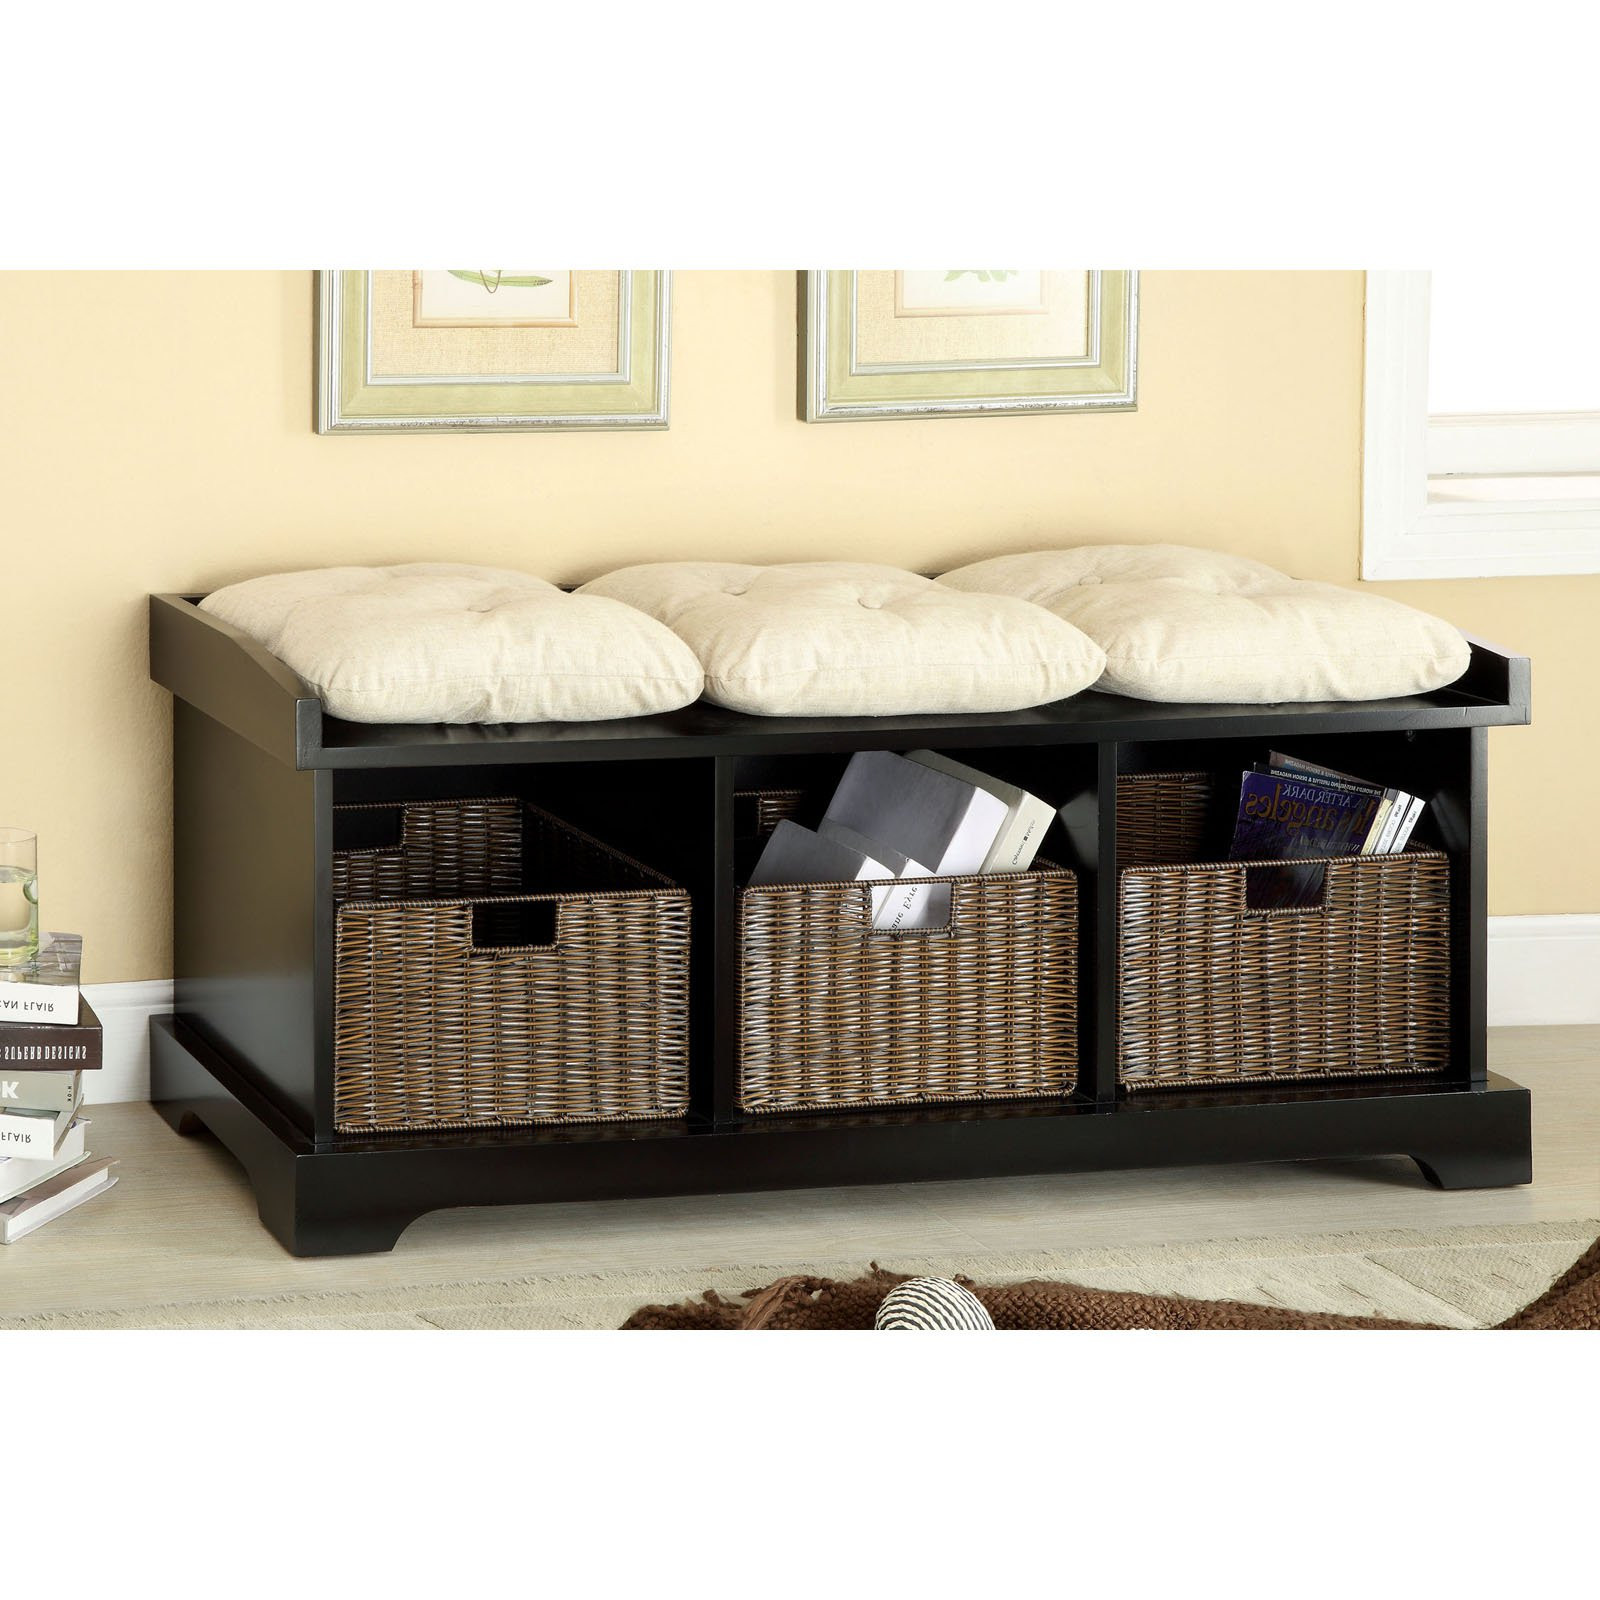 Storage Bench With Baskets
 Furniture of America Palton Storage Bench with Faux Rattan